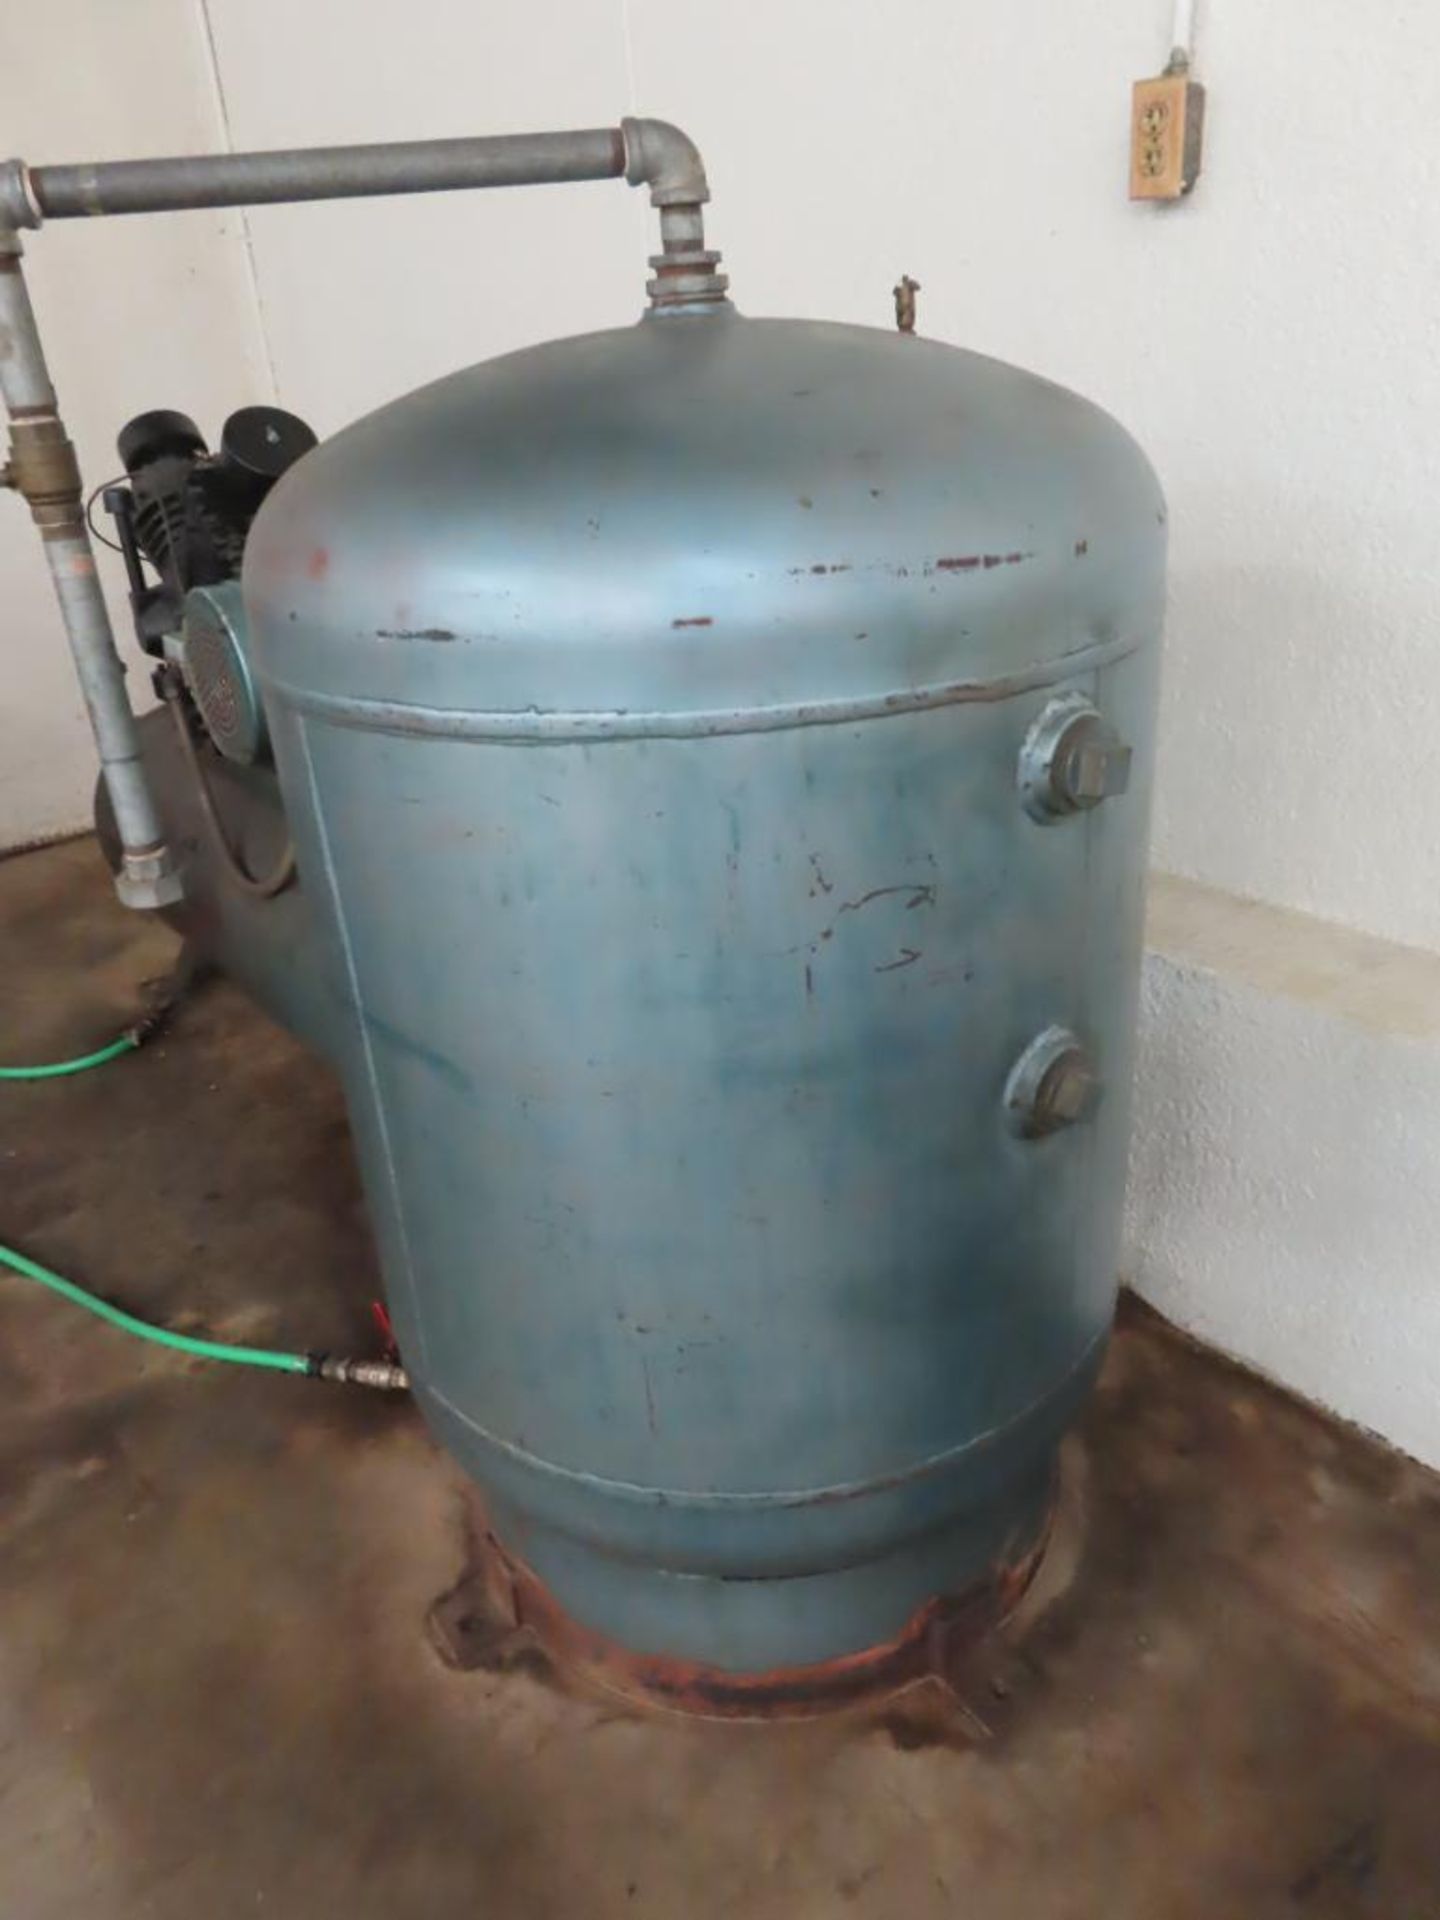 APPROX. 120 GAL. VERT. AIR STG. TANK (LOCATED OFF-SITE IN TULSA AREA)